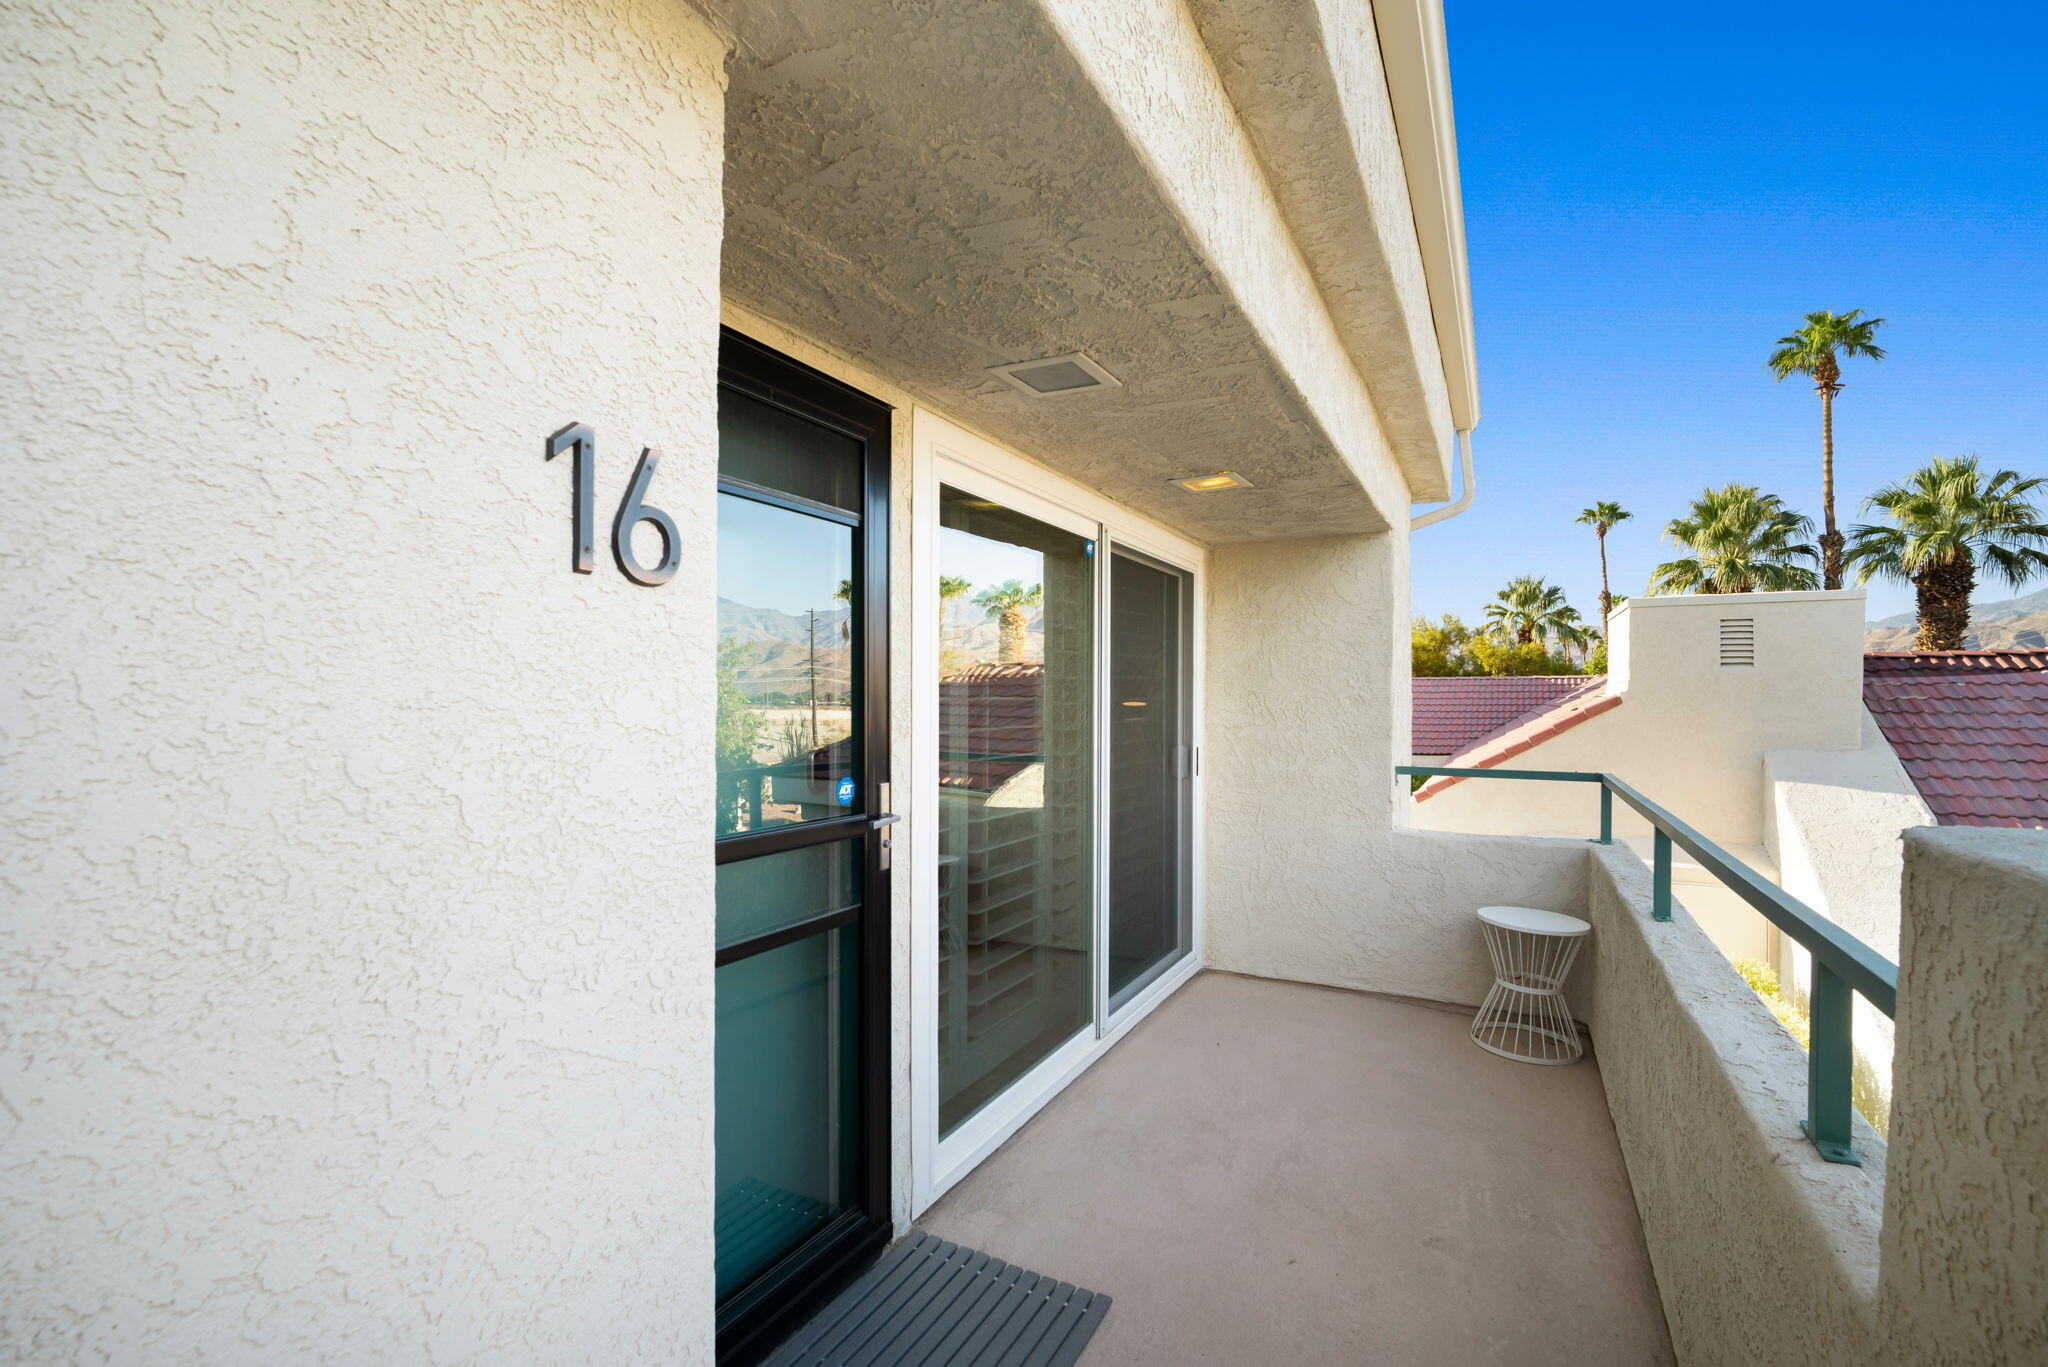 Image 1 for 32505 Candlewood DR #16